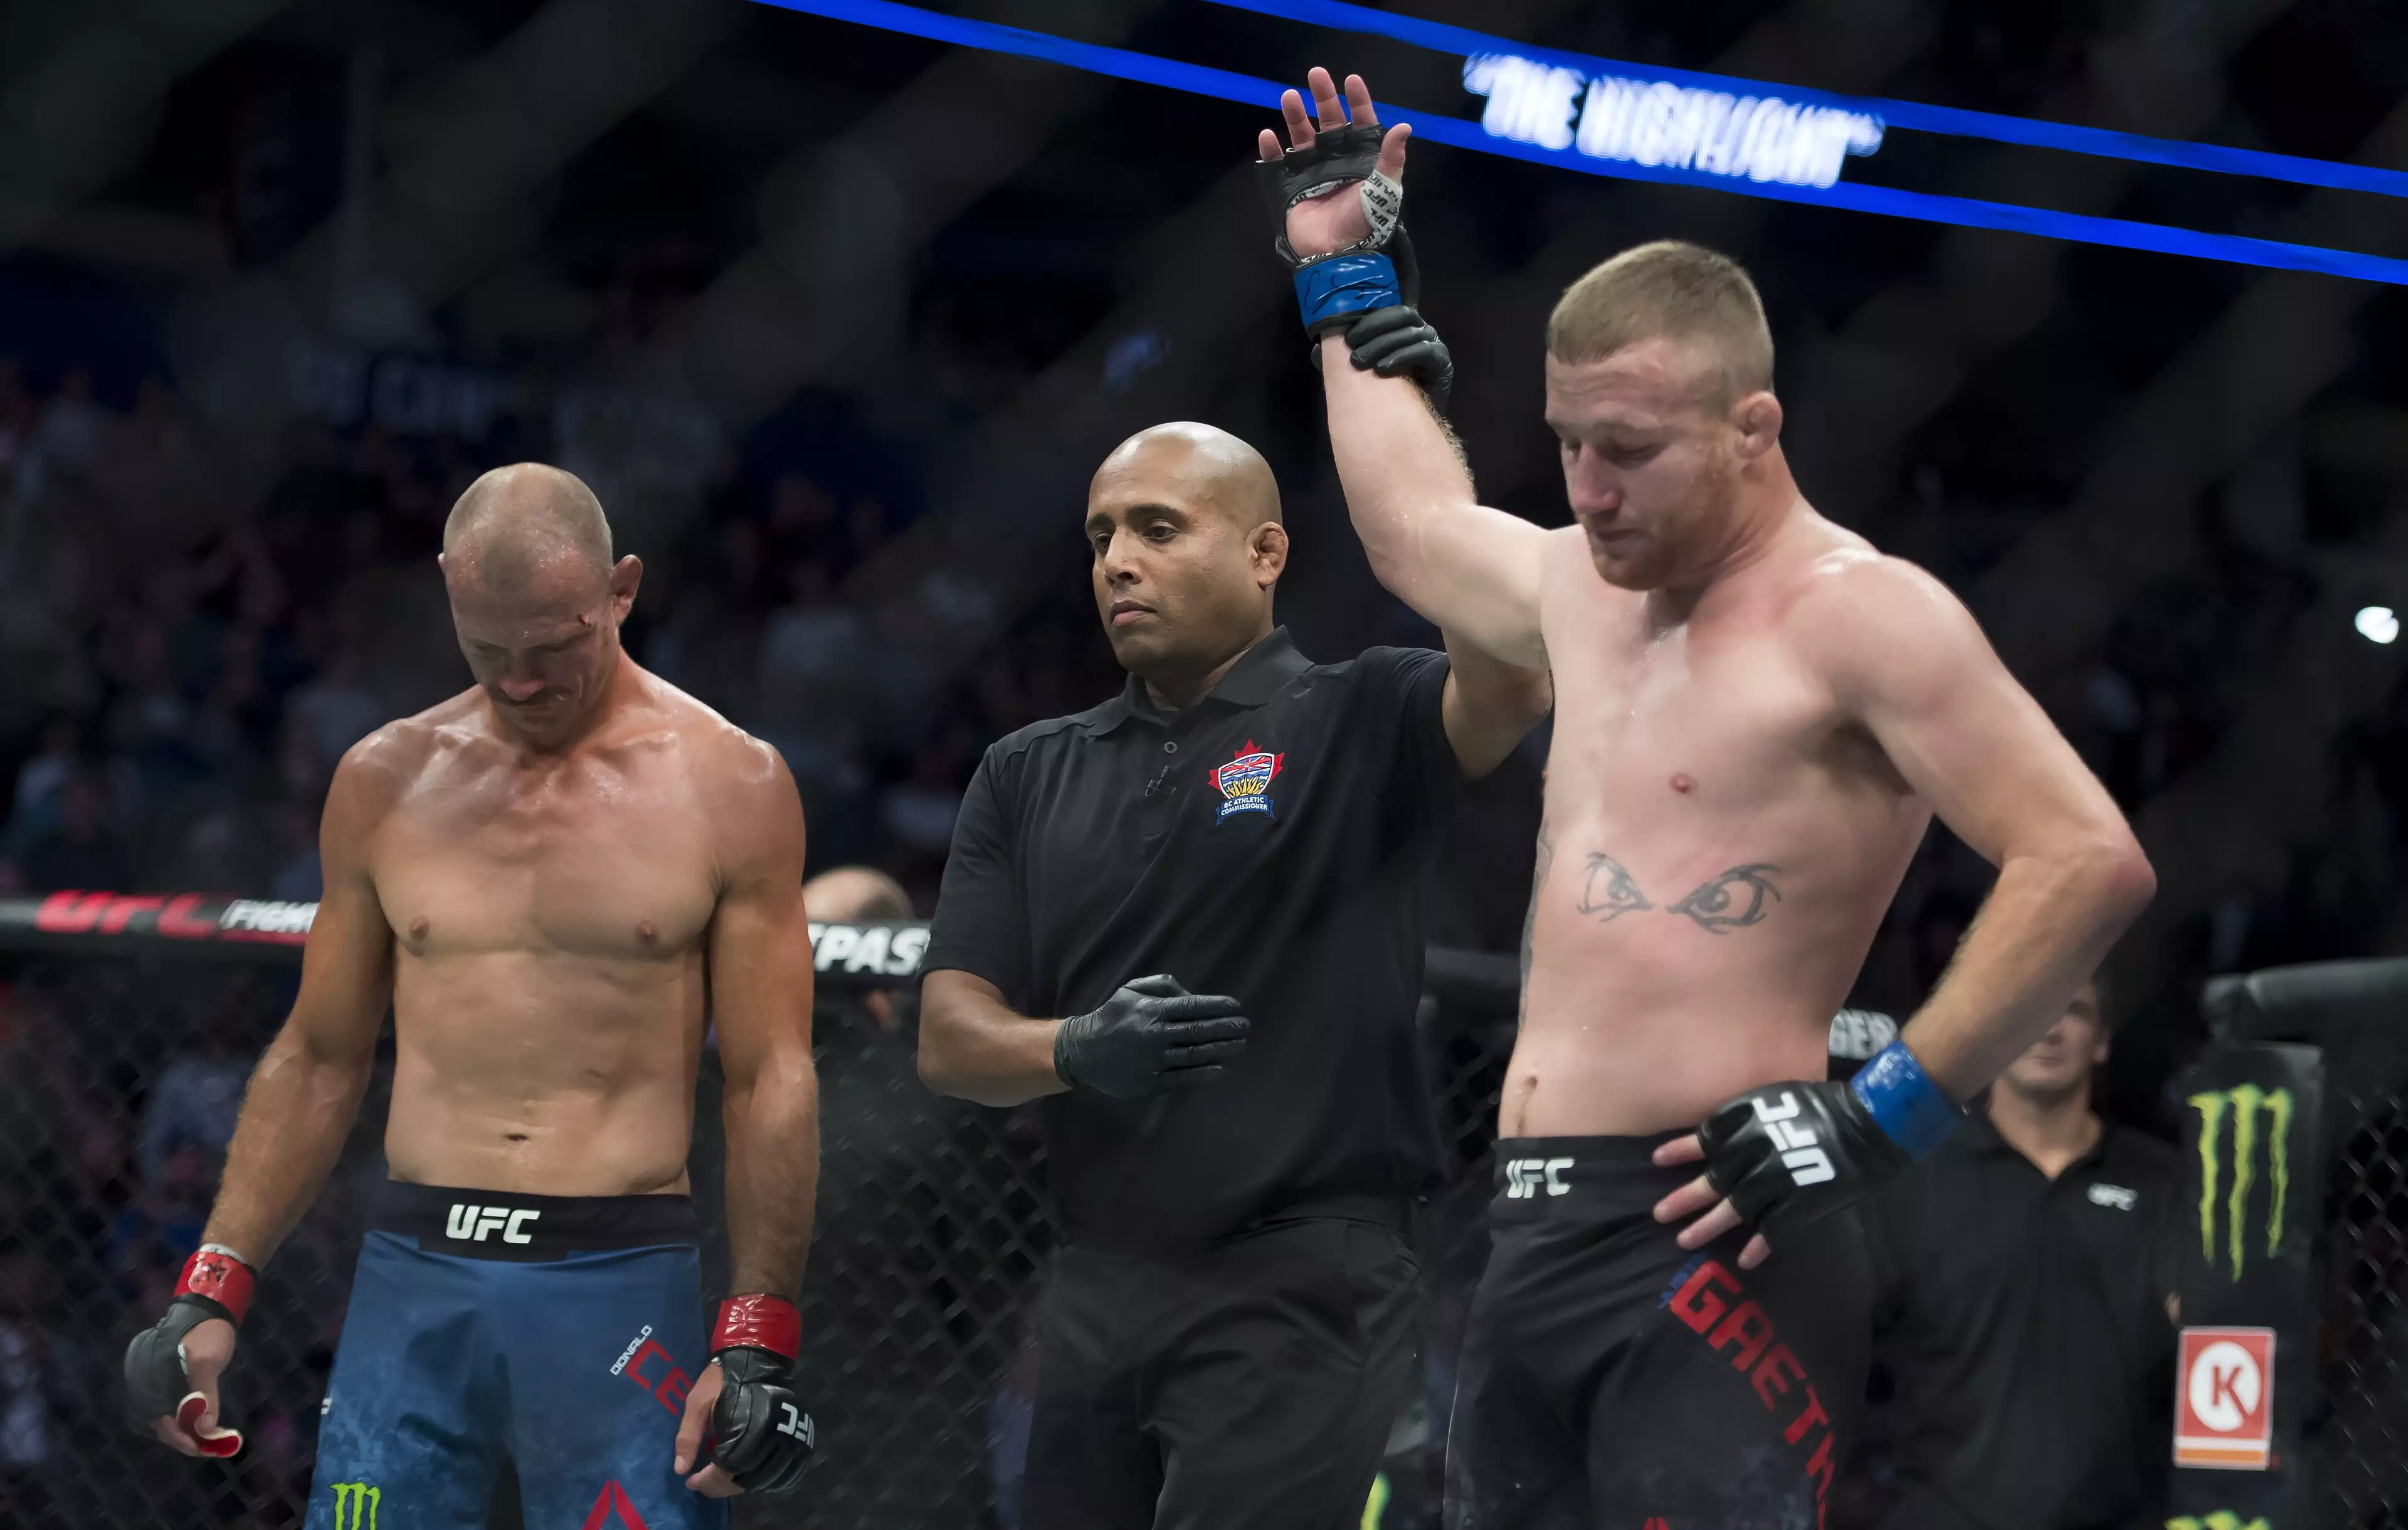 Justin Gaethje stopped Donald Cerrone in the first round on Saturday night in Vancouver